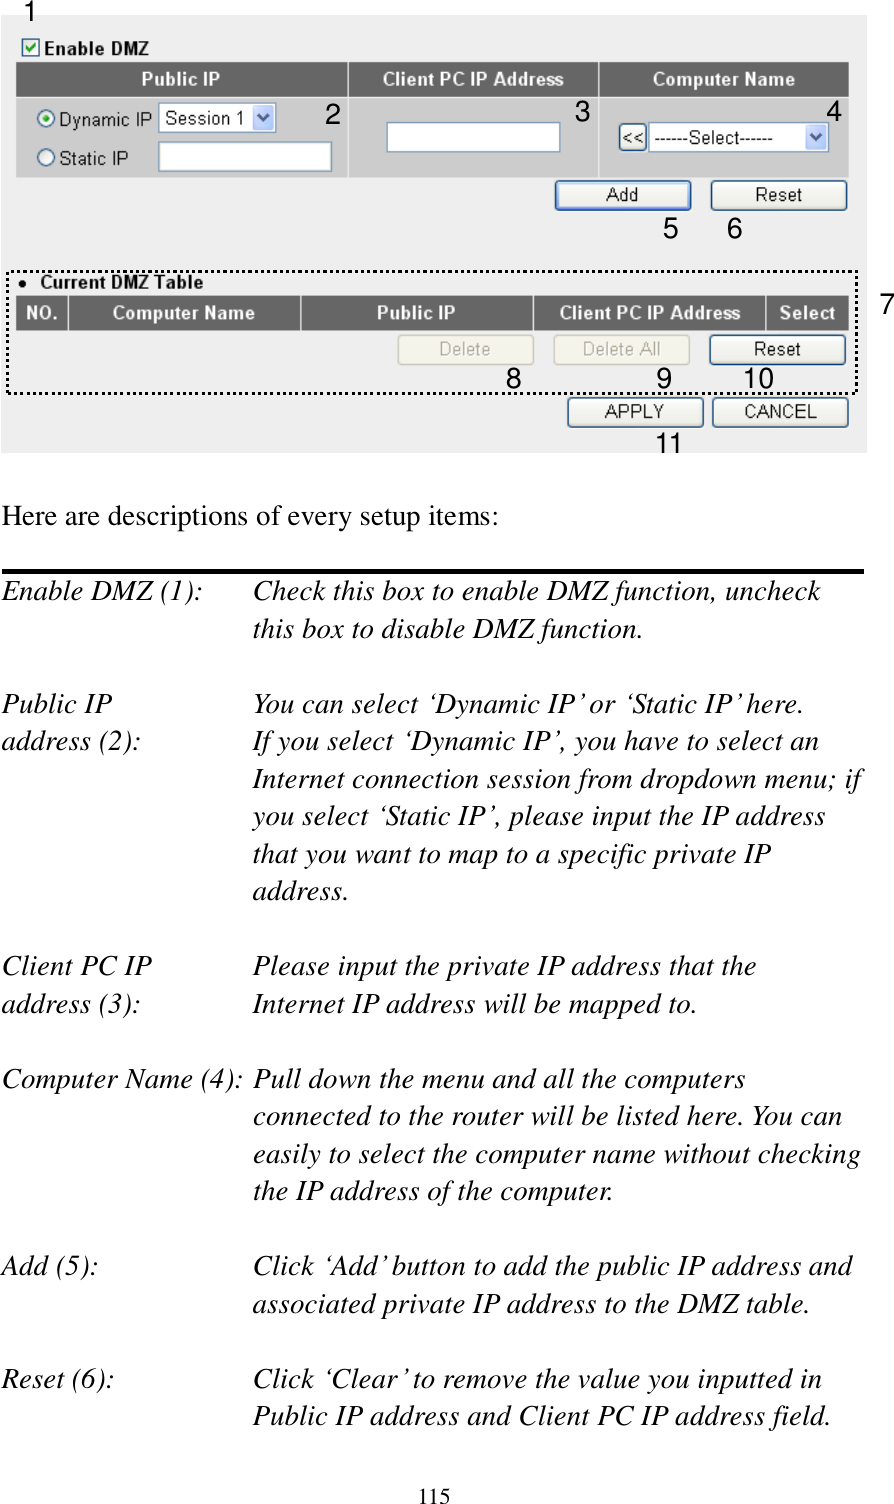 115   Here are descriptions of every setup items:  Enable DMZ (1):    Check this box to enable DMZ function, uncheck this box to disable DMZ function.  Public IP        You can select „Dynamic IP‟ or „Static IP‟ here. address (2):    If you select „Dynamic IP‟, you have to select an Internet connection session from dropdown menu; if you select „Static IP‟, please input the IP address that you want to map to a specific private IP address.  Client PC IP      Please input the private IP address that the address (3):      Internet IP address will be mapped to.  Computer Name (4): Pull down the menu and all the computers connected to the router will be listed here. You can easily to select the computer name without checking the IP address of the computer.  Add (5):    Click „Add‟ button to add the public IP address and associated private IP address to the DMZ table.  Reset (6):    Click „Clear‟ to remove the value you inputted in Public IP address and Client PC IP address field. 1 2 4 5 6 7 8 9 10 11 3 